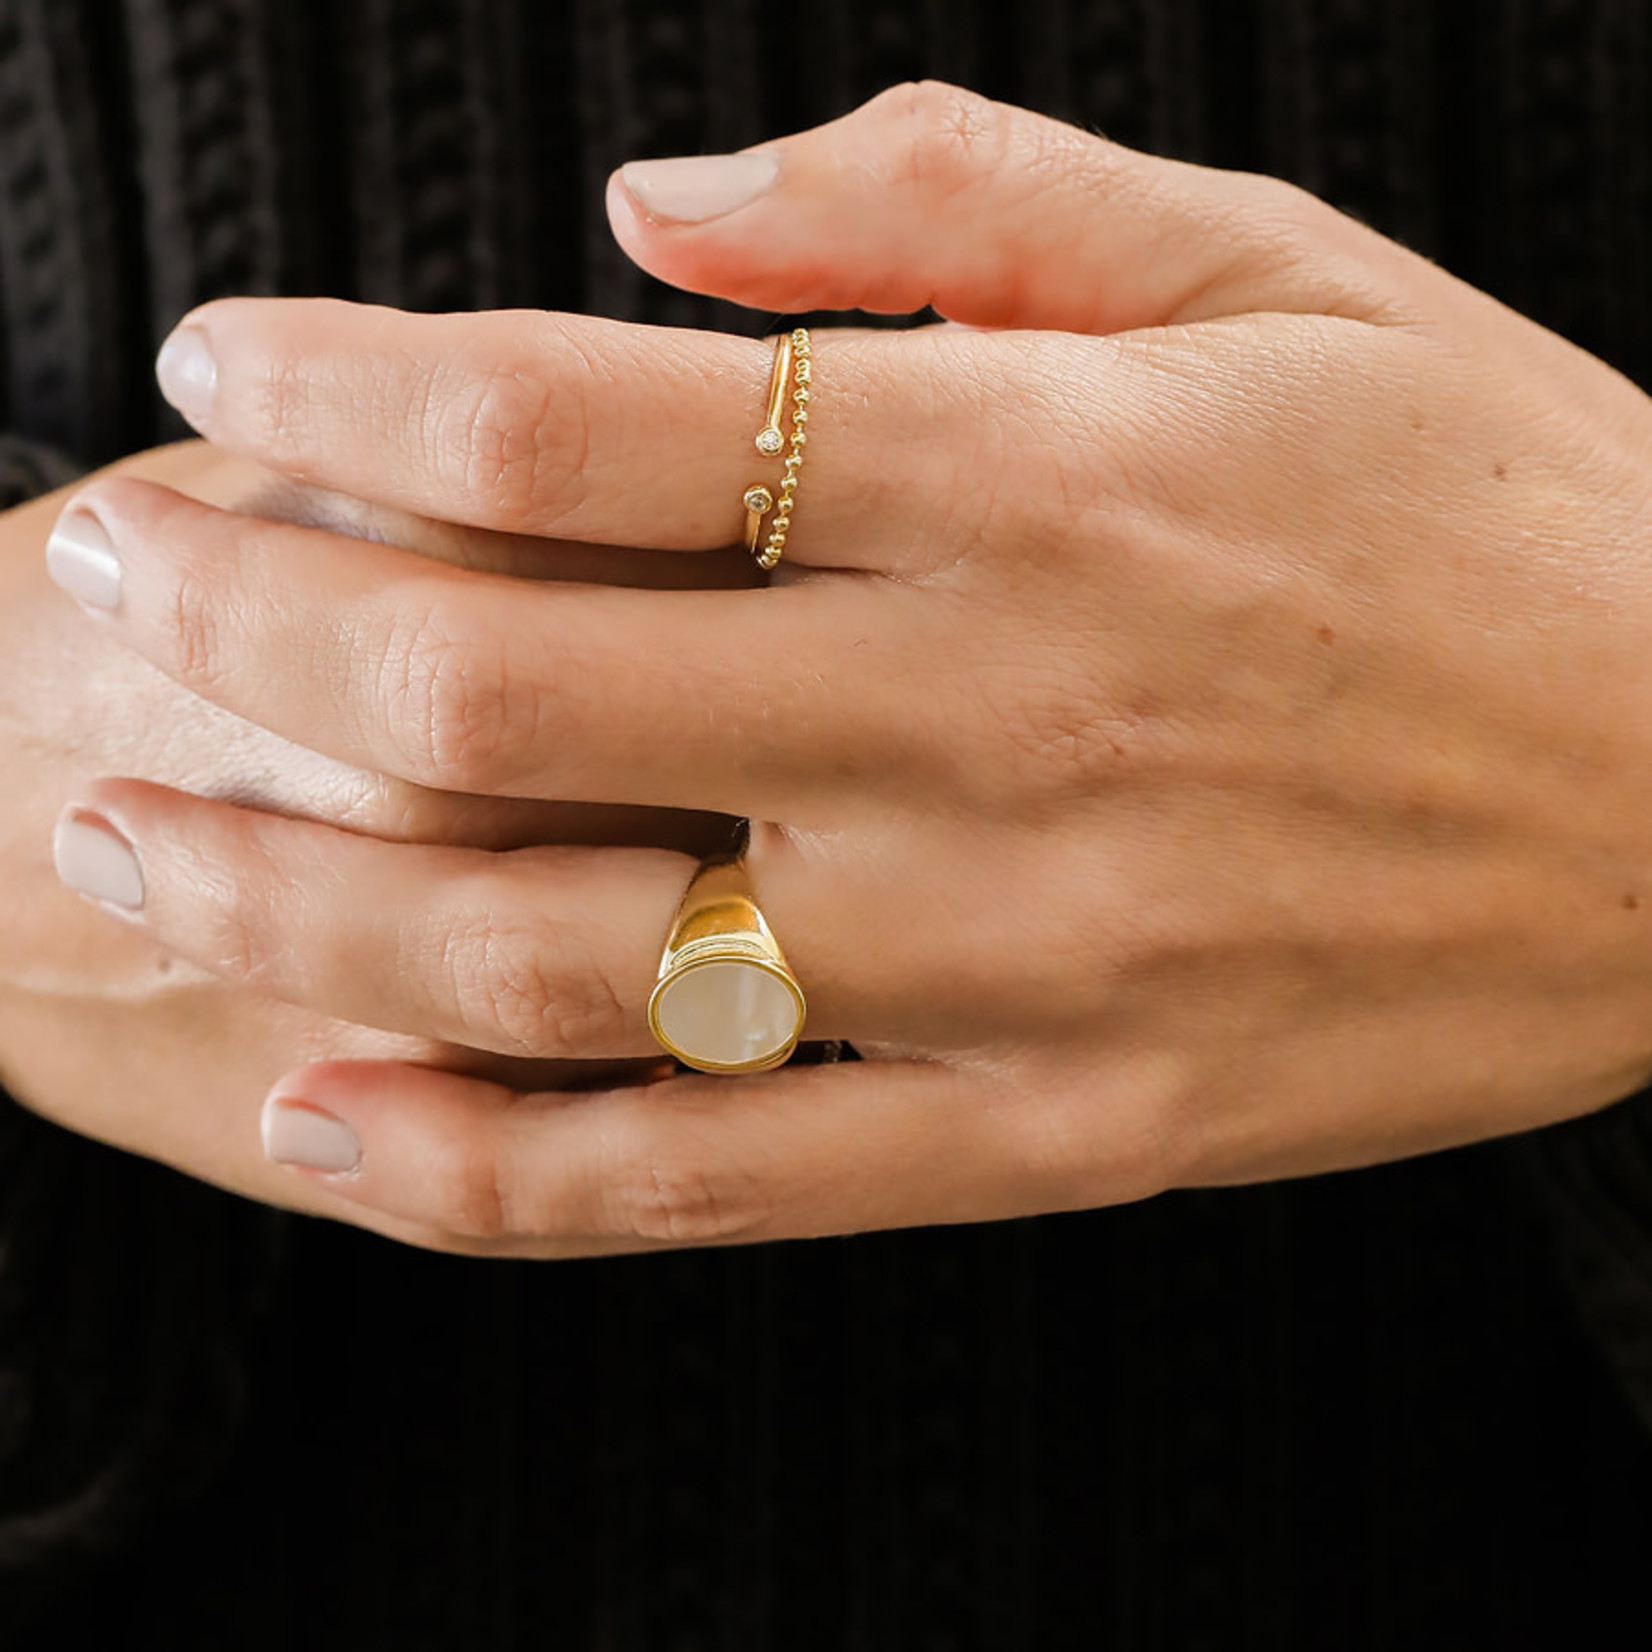 JaxKelly Mother of Pearl Signet Ring